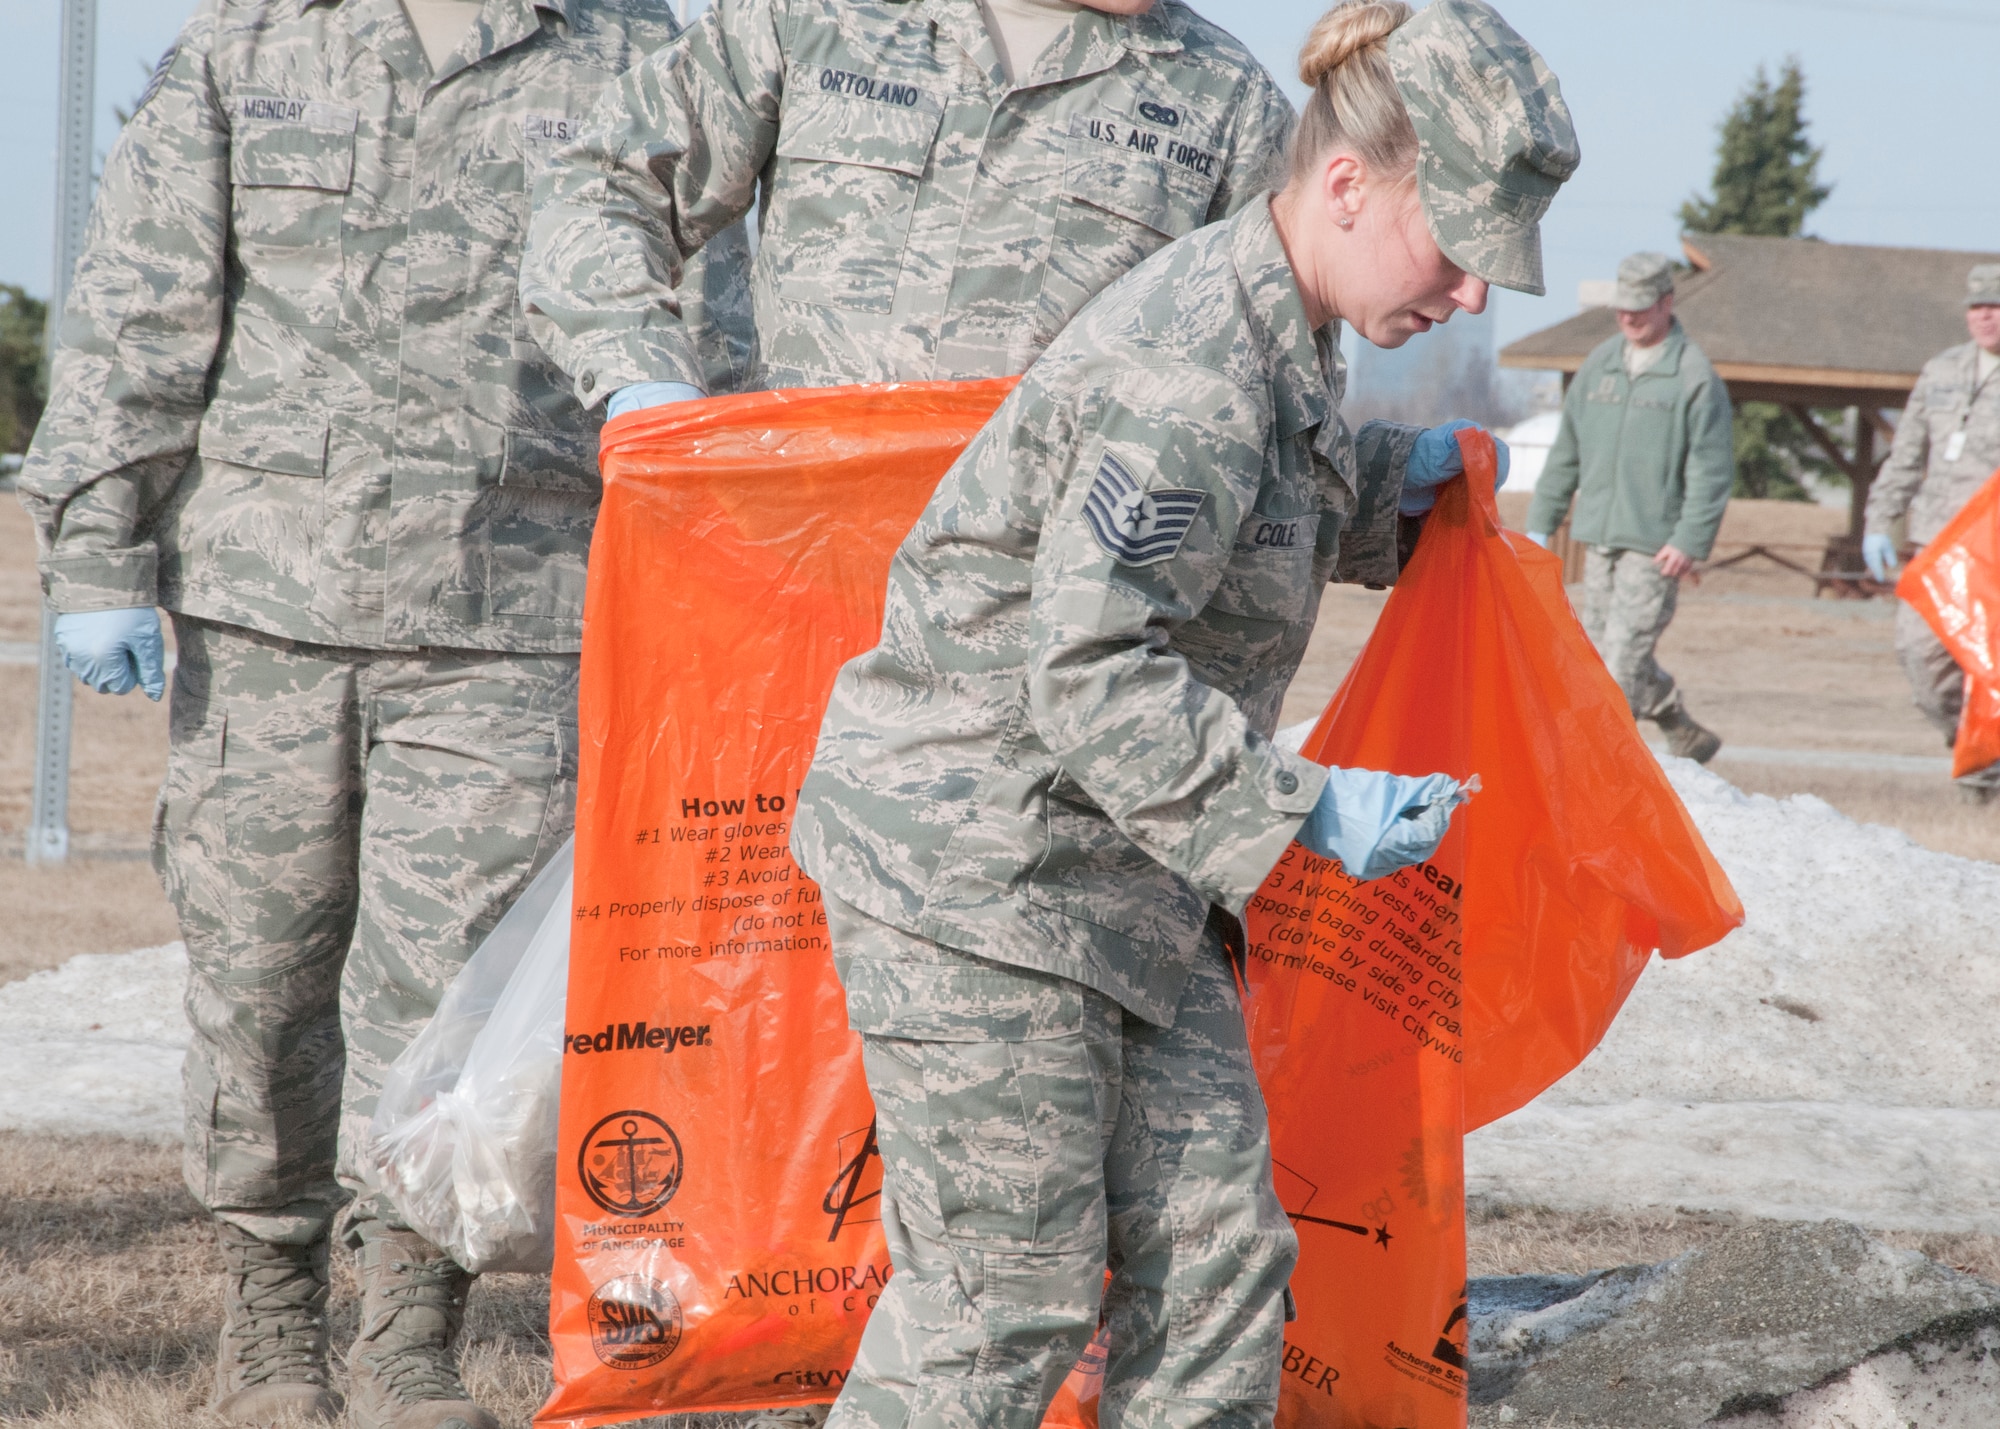 JOINT BASE ELMENDORF-RICHARDSON, Alaska -- Tech. Sgt. Rebecca Cole, a maintenance support technician from the 176 Logistics Readiness Squadron, picks up debris forthe base's Spring Cleanup on May 6. Military members across the base cleaned around their work buildings as the melting snow revealed litter.  National Guard photo by Staff Sgt. N. Alicia Goldberger.